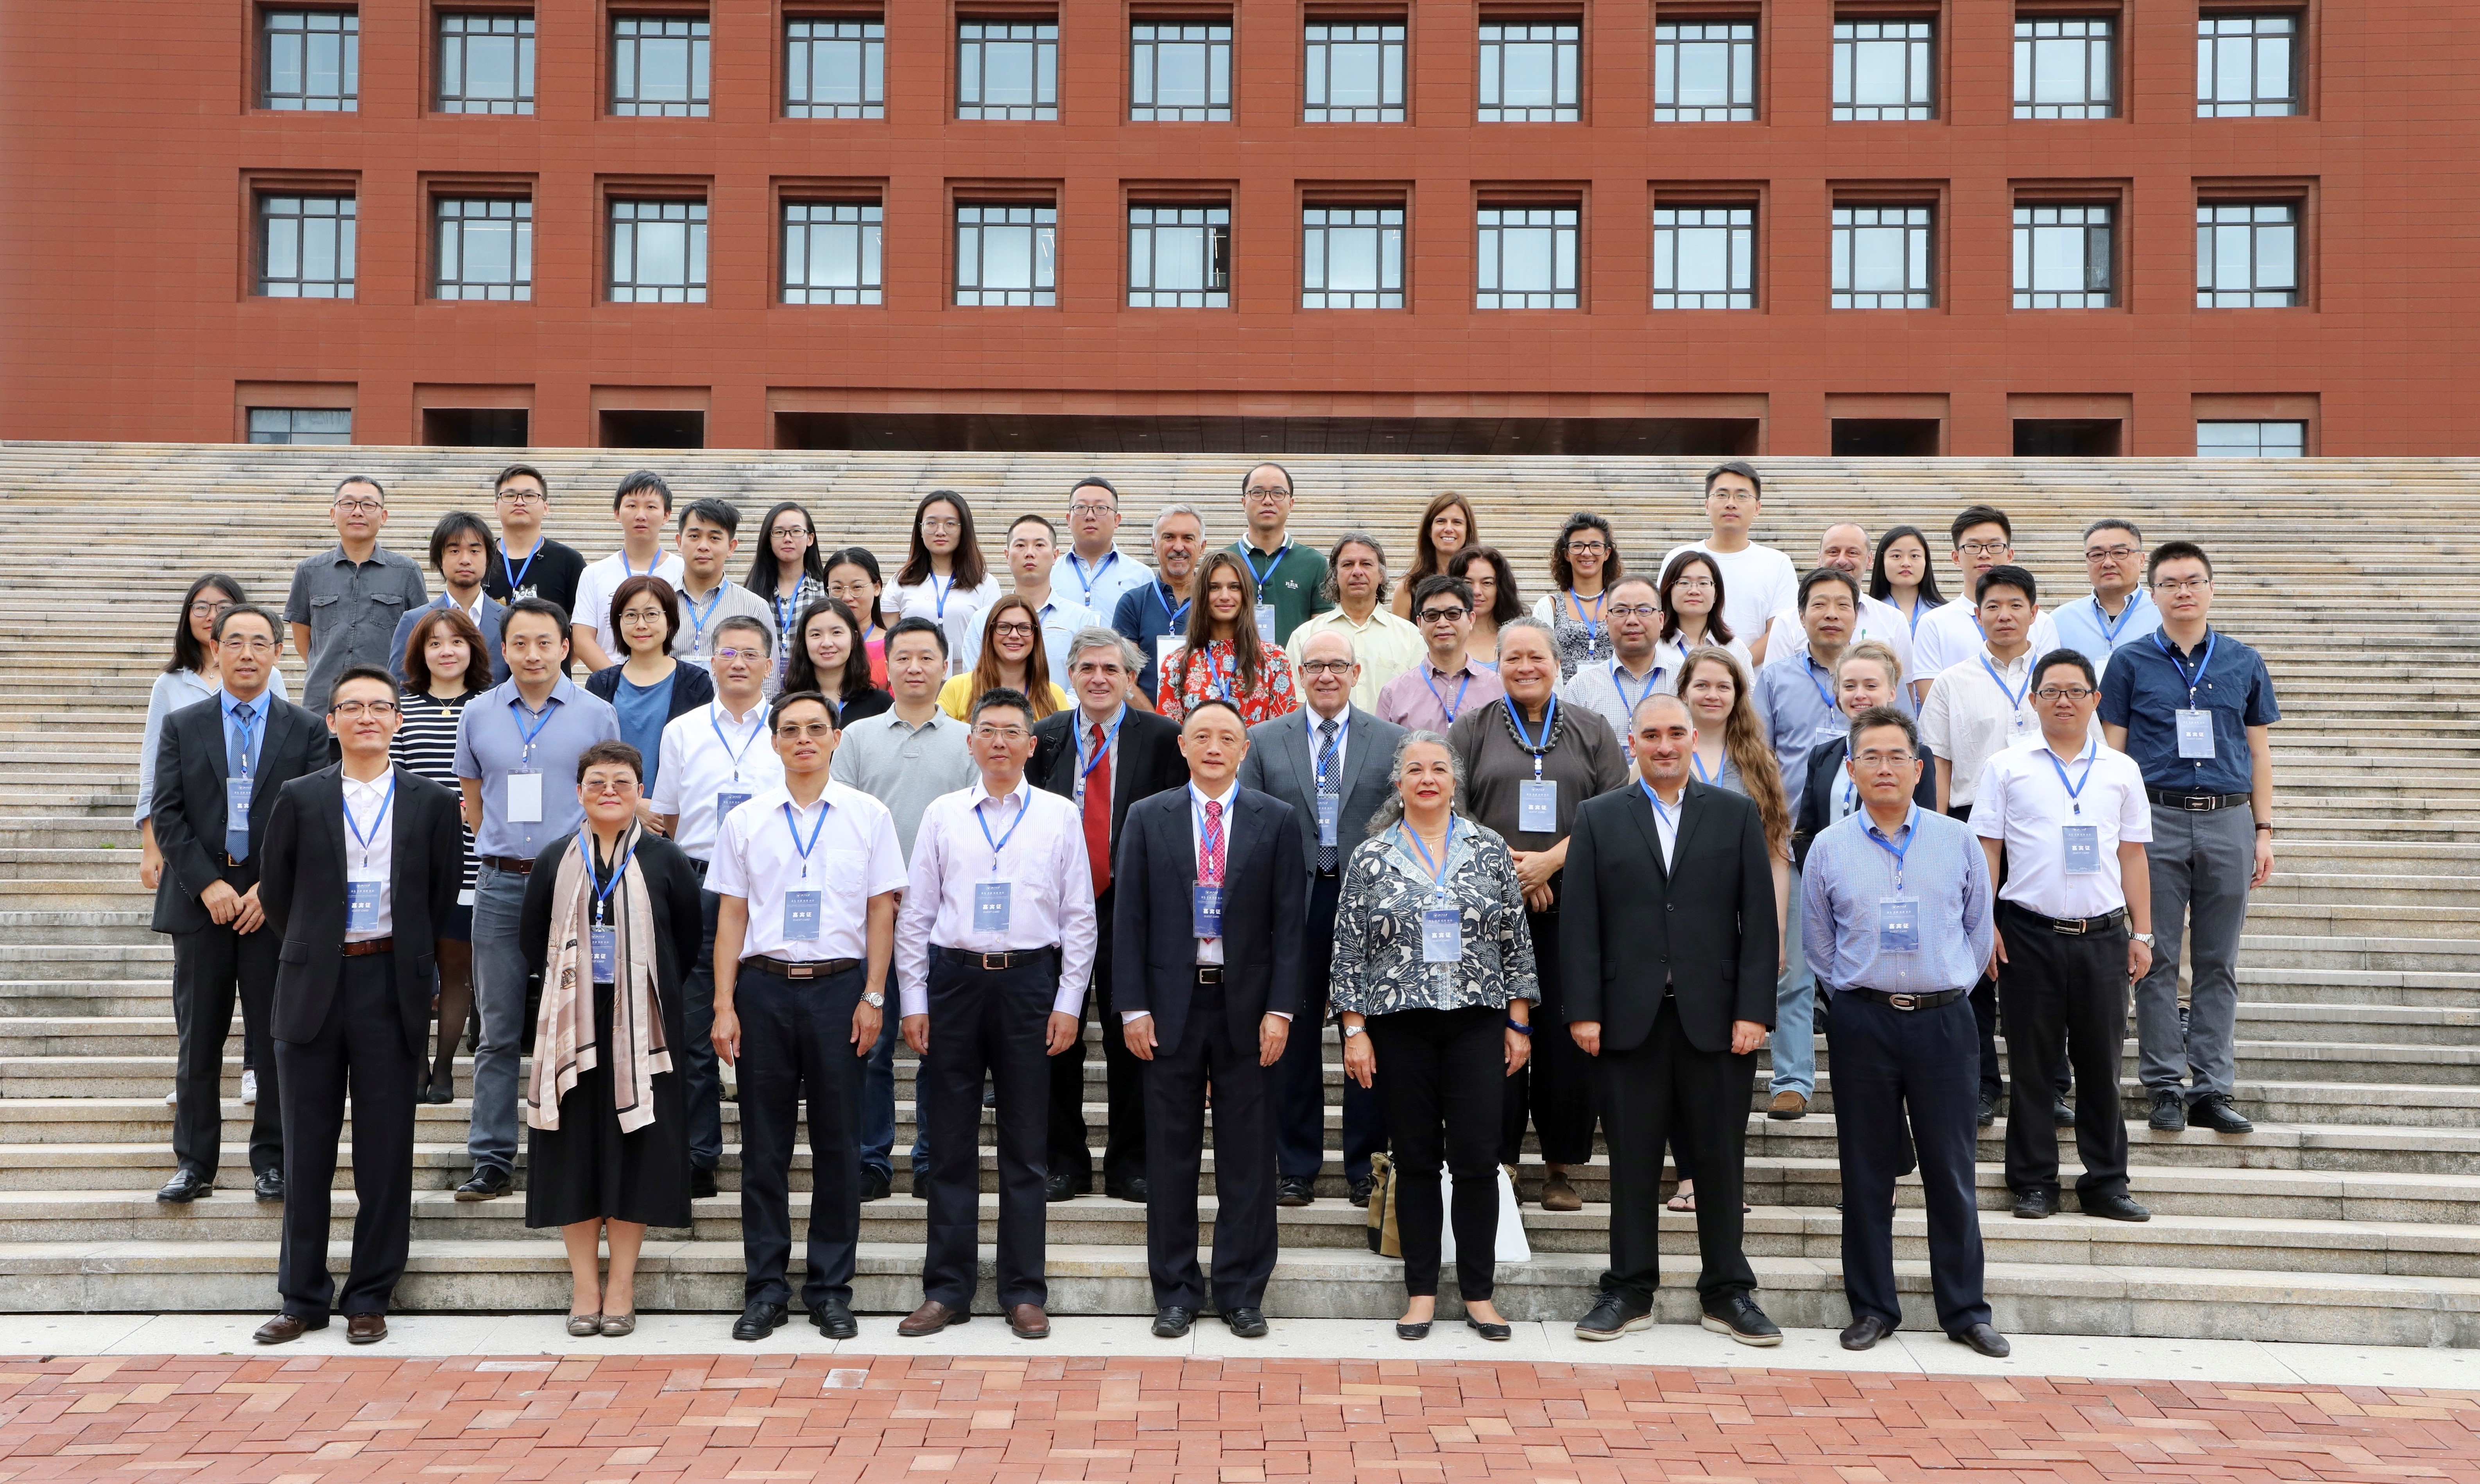 Photo of conference participants standing for an official photo on stairs in front of a brick building